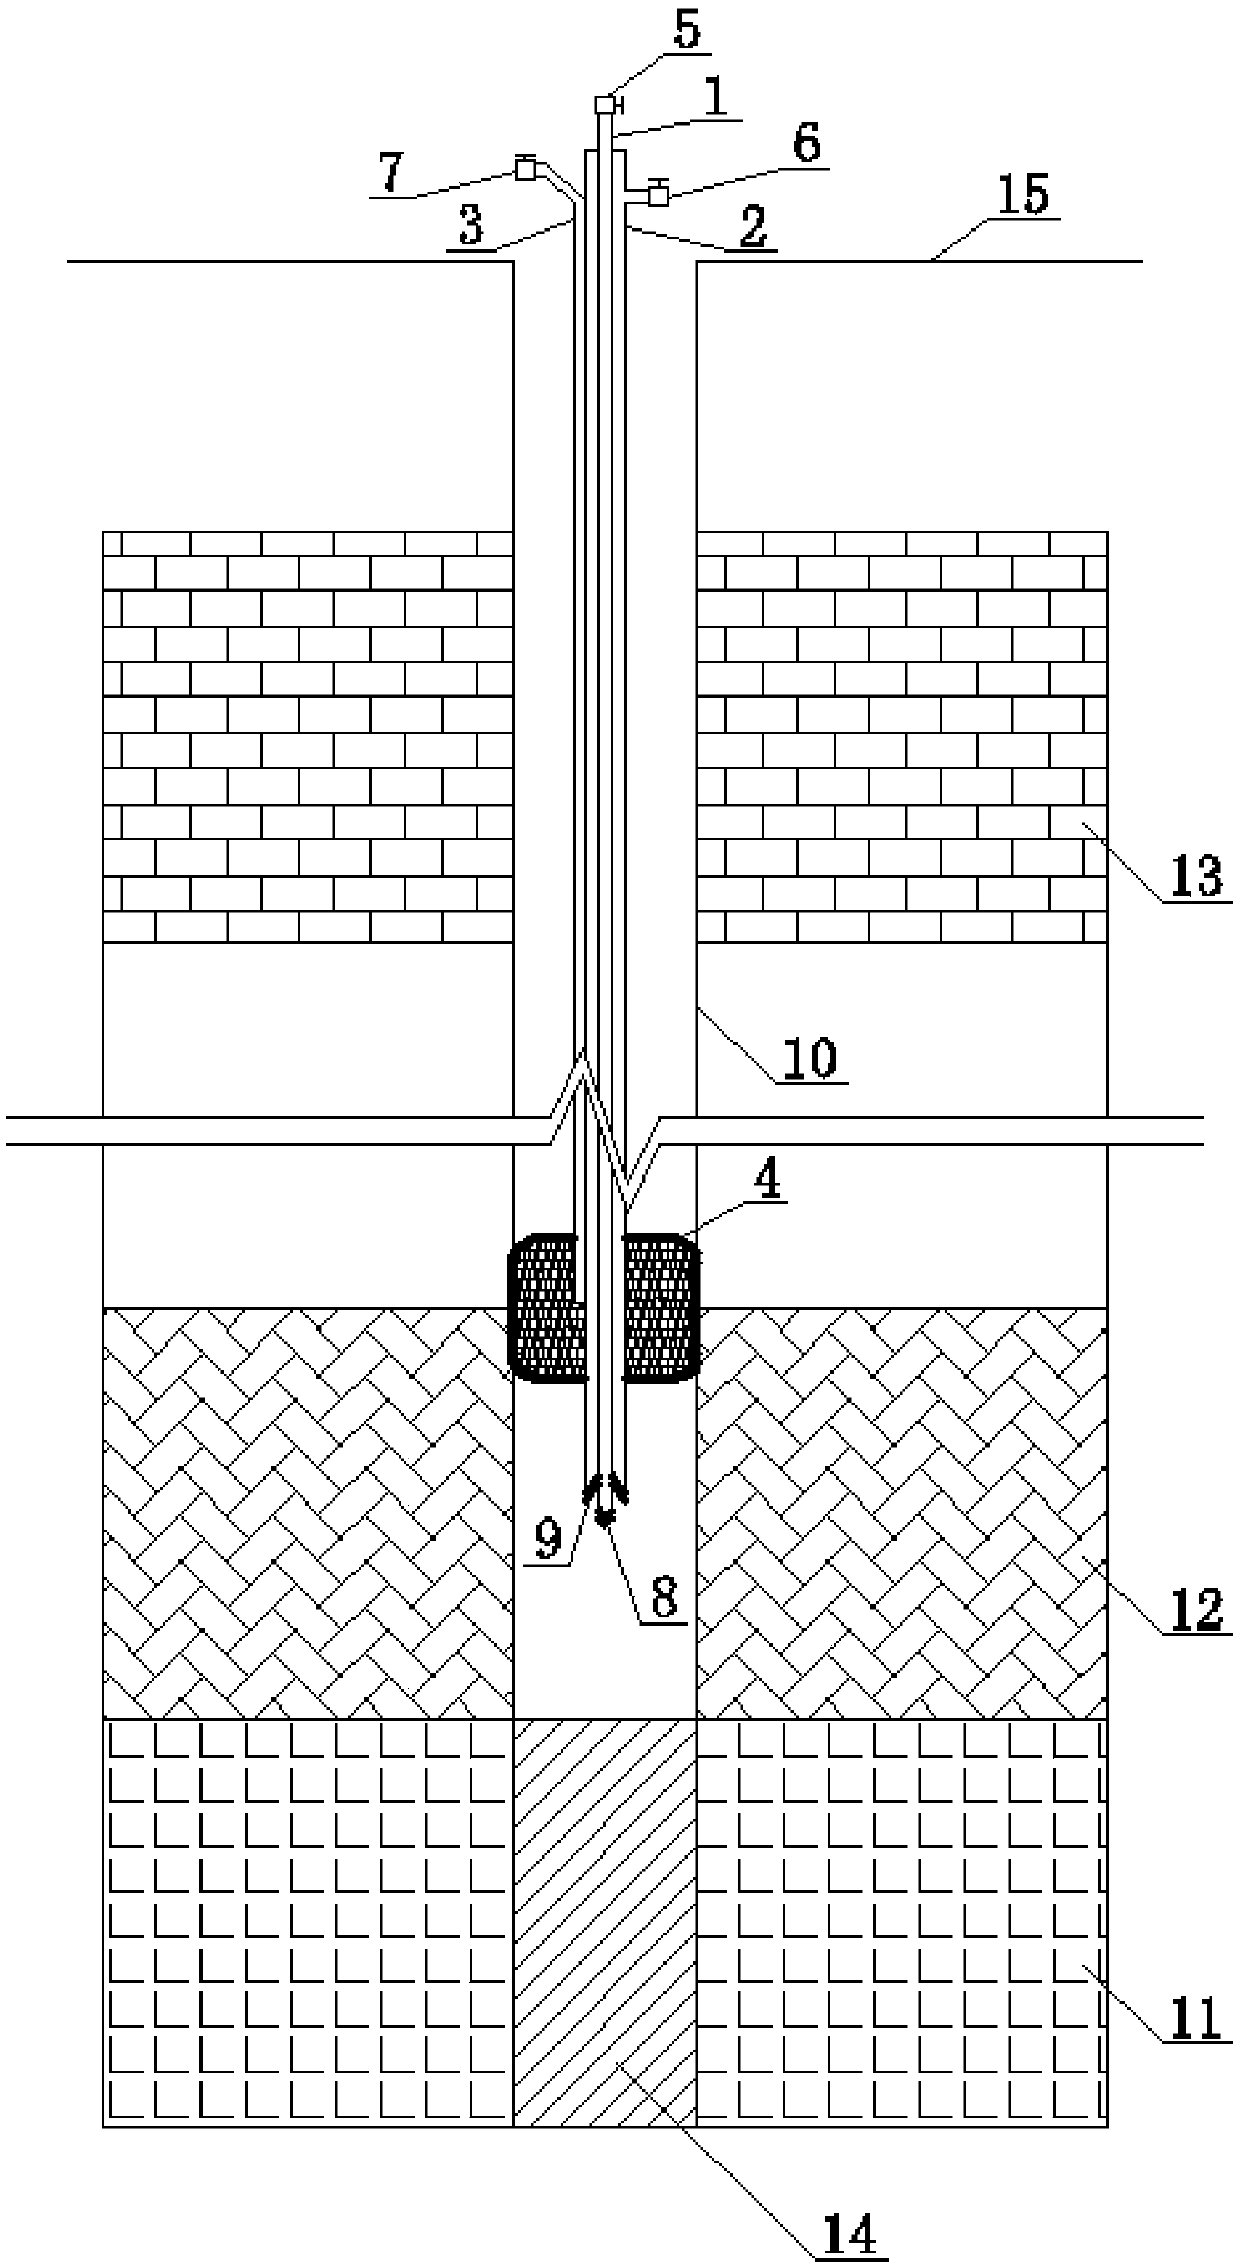 Retrograde sectional grouting device with a single grouting-stop plug and method applicable to fractured rock masses